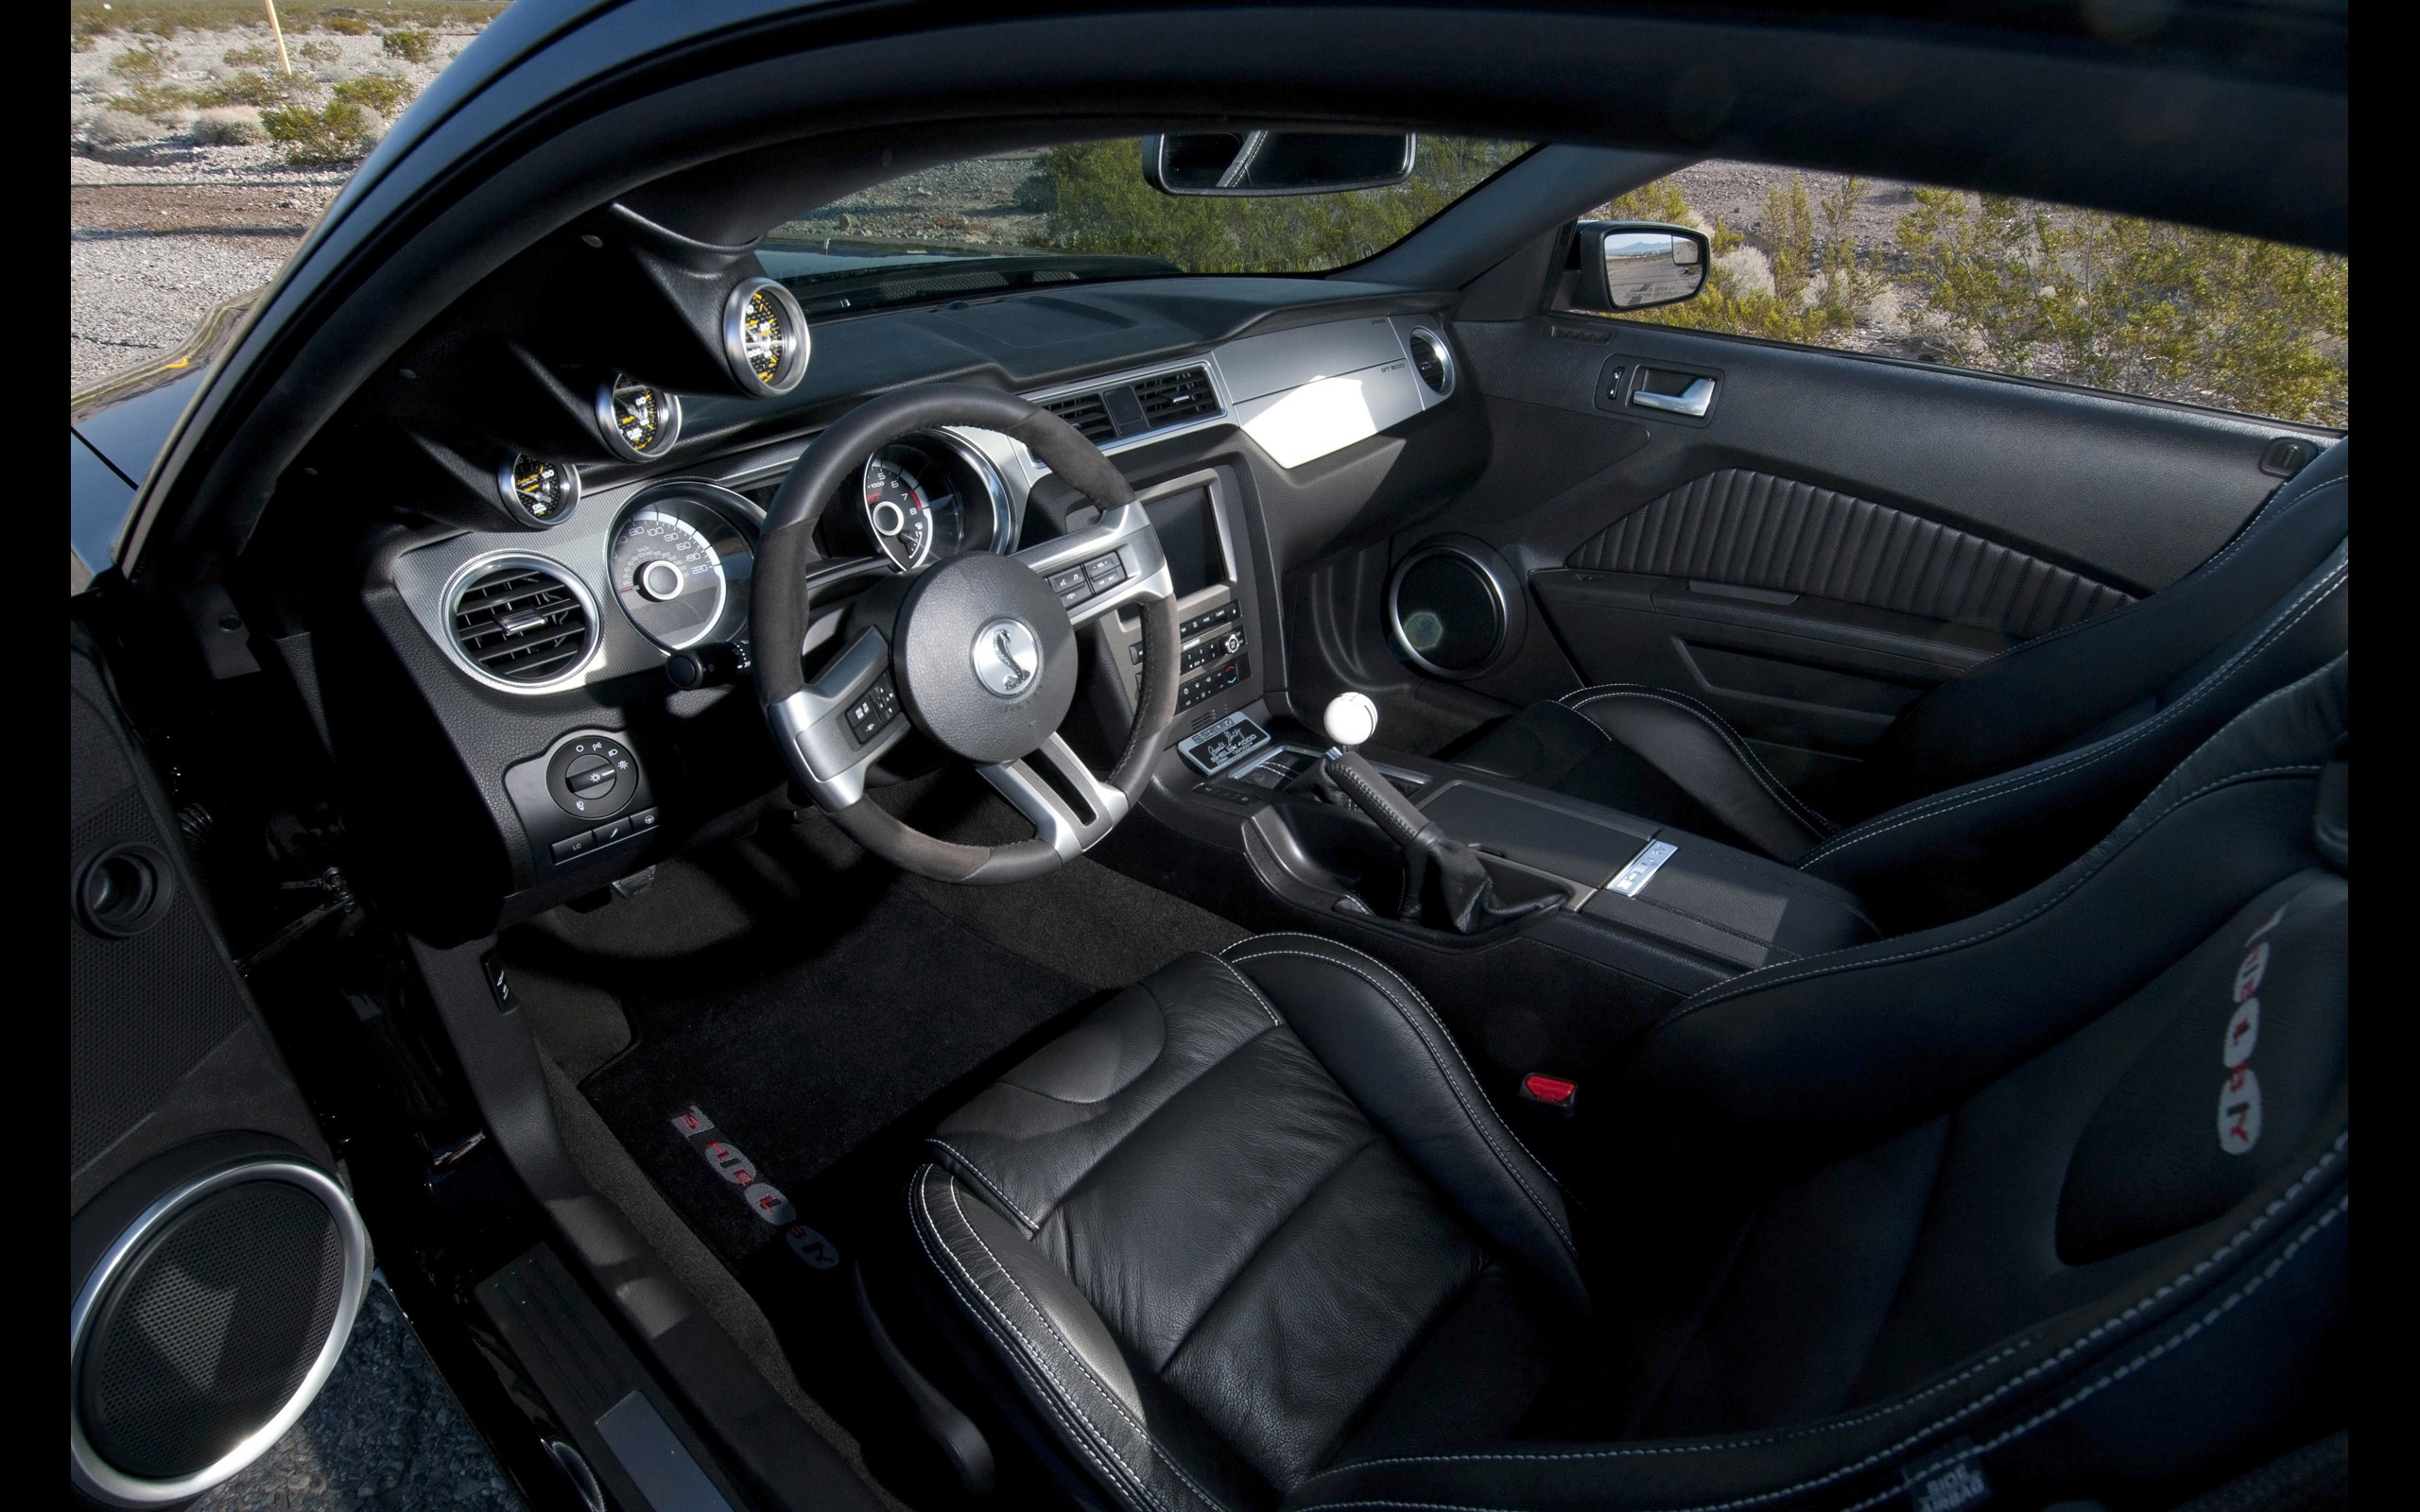 2013, Shelby, 1000, Ford, Mustang, Muscle, Supercar, Interior Wallpaper